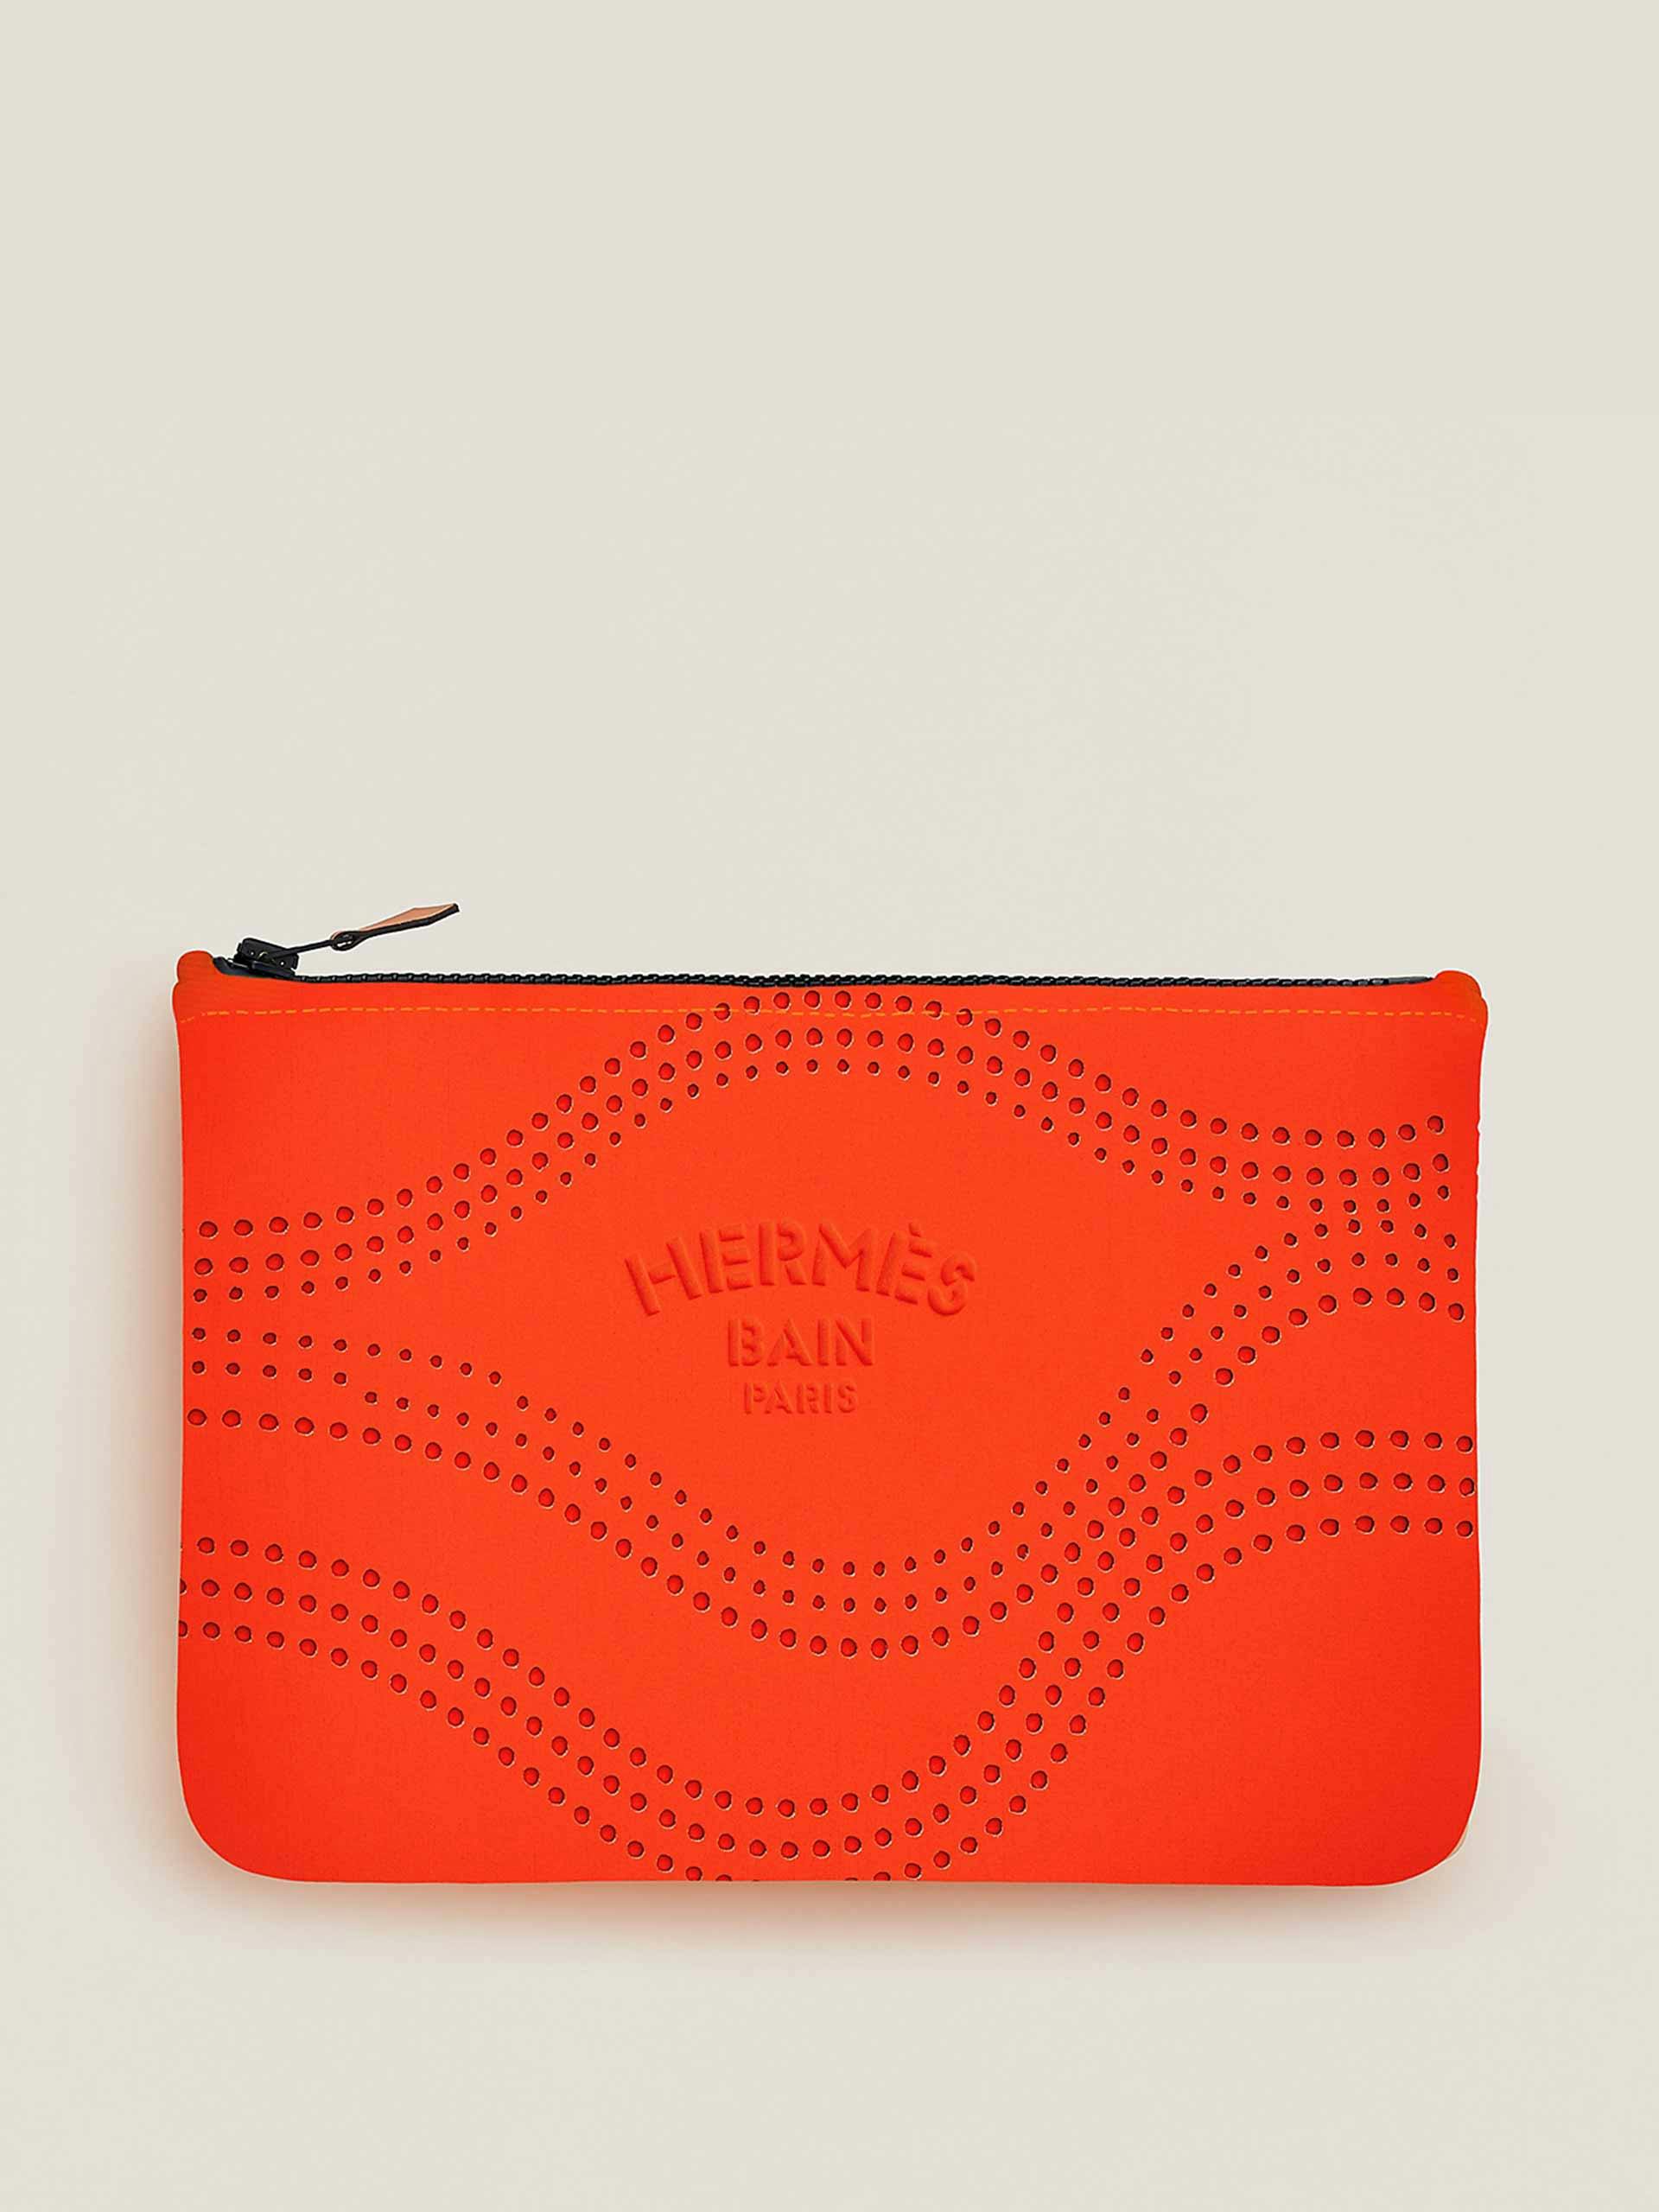 Hermes bright red leather pouch